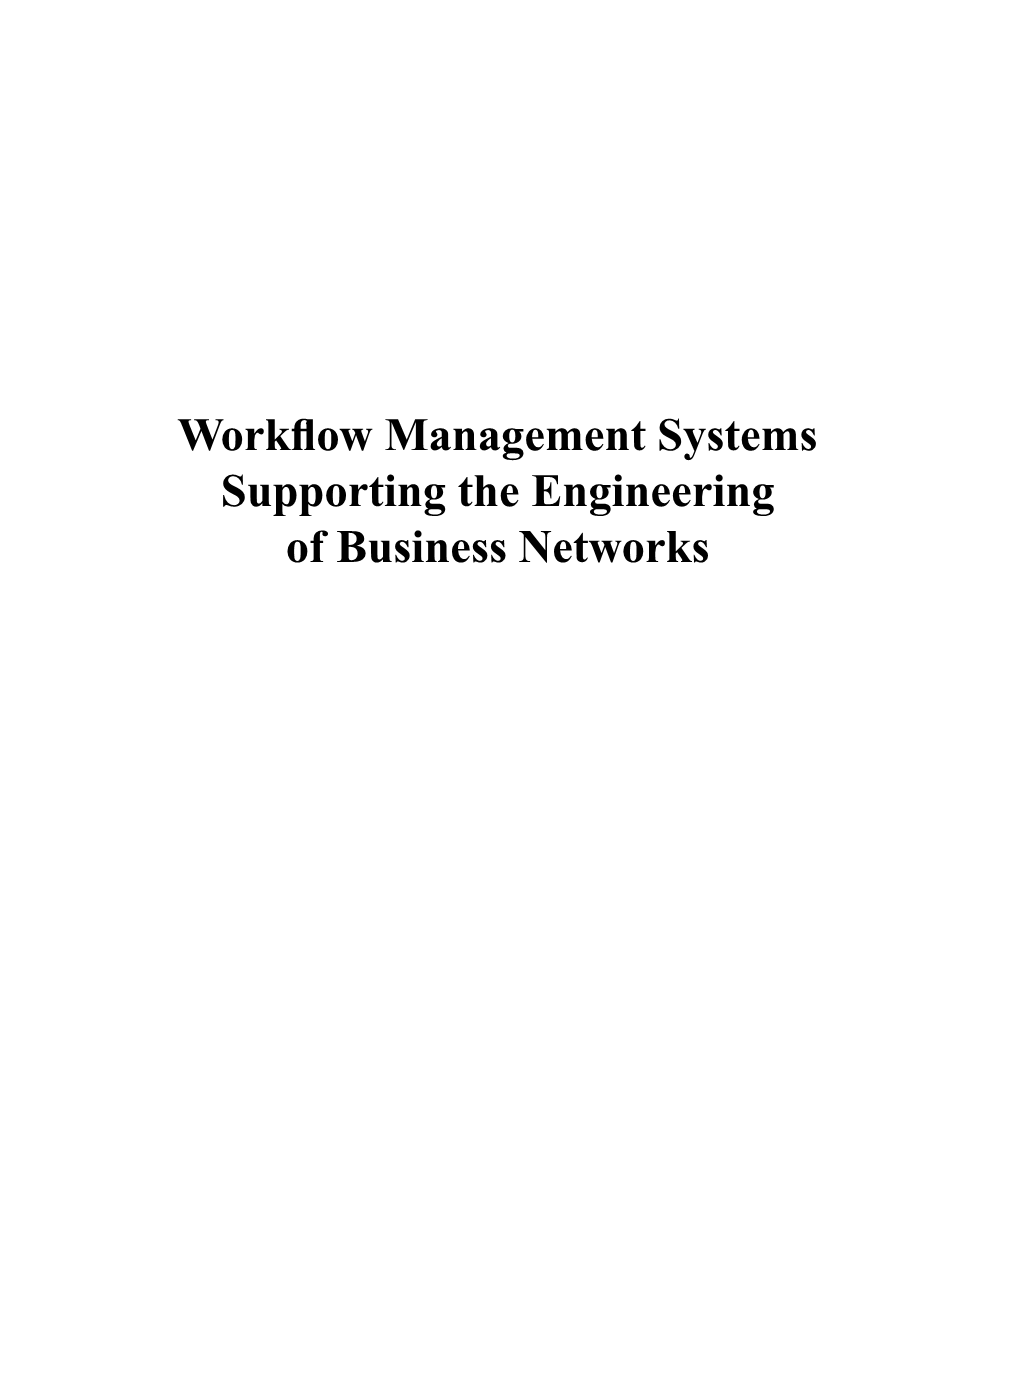 Workflow Management Systems Supporting the Engineering of Business Networks